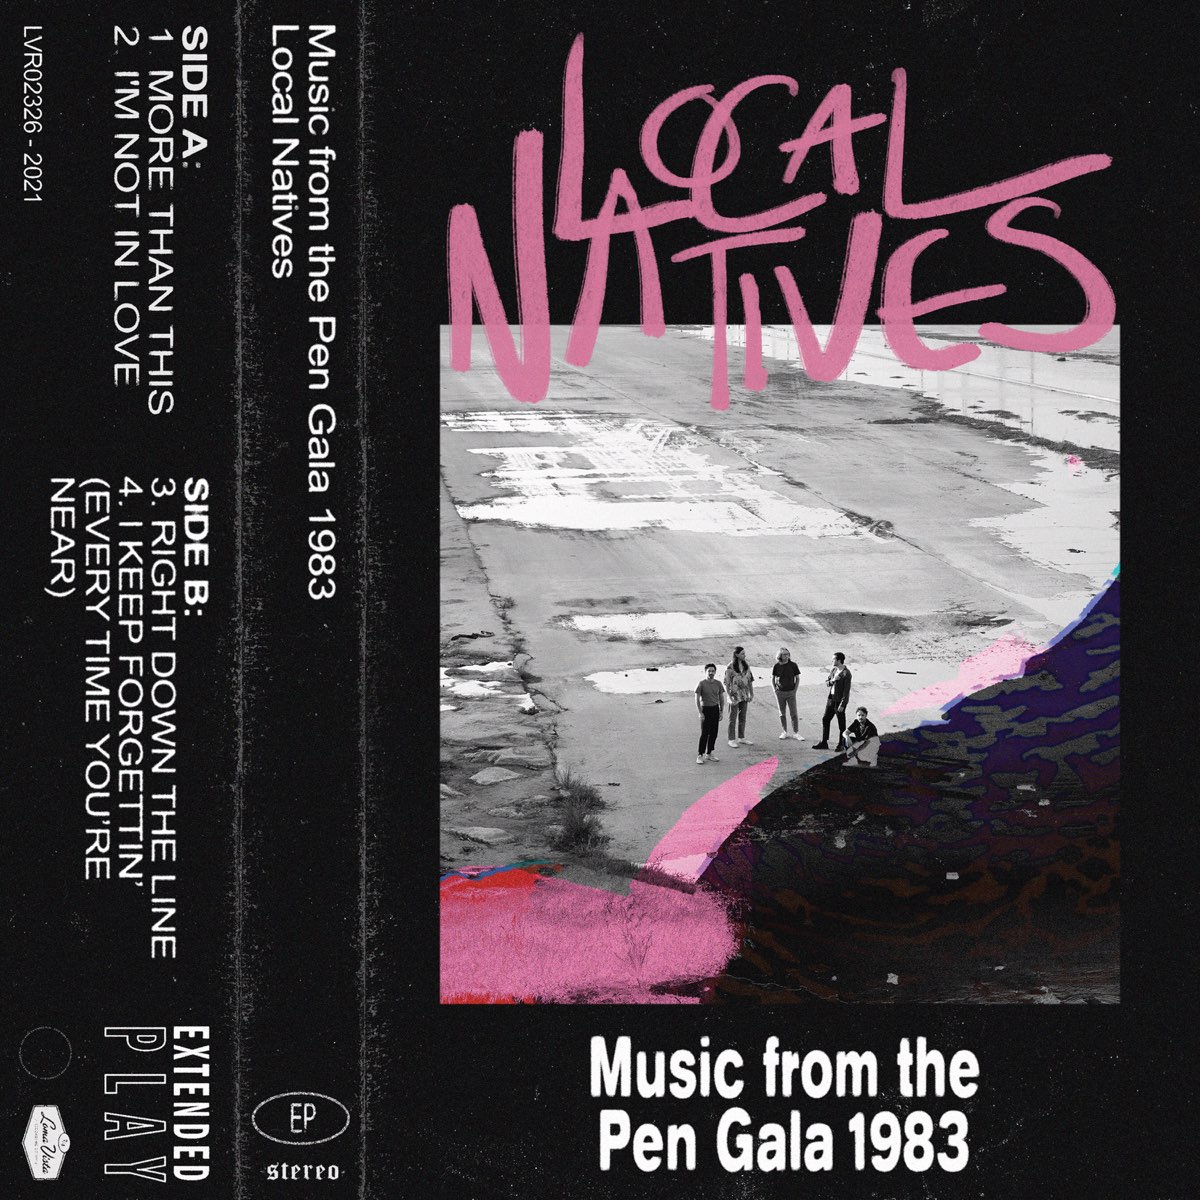 ‎Music From The Pen Gala 1983 EP by Local Natives on Apple Music